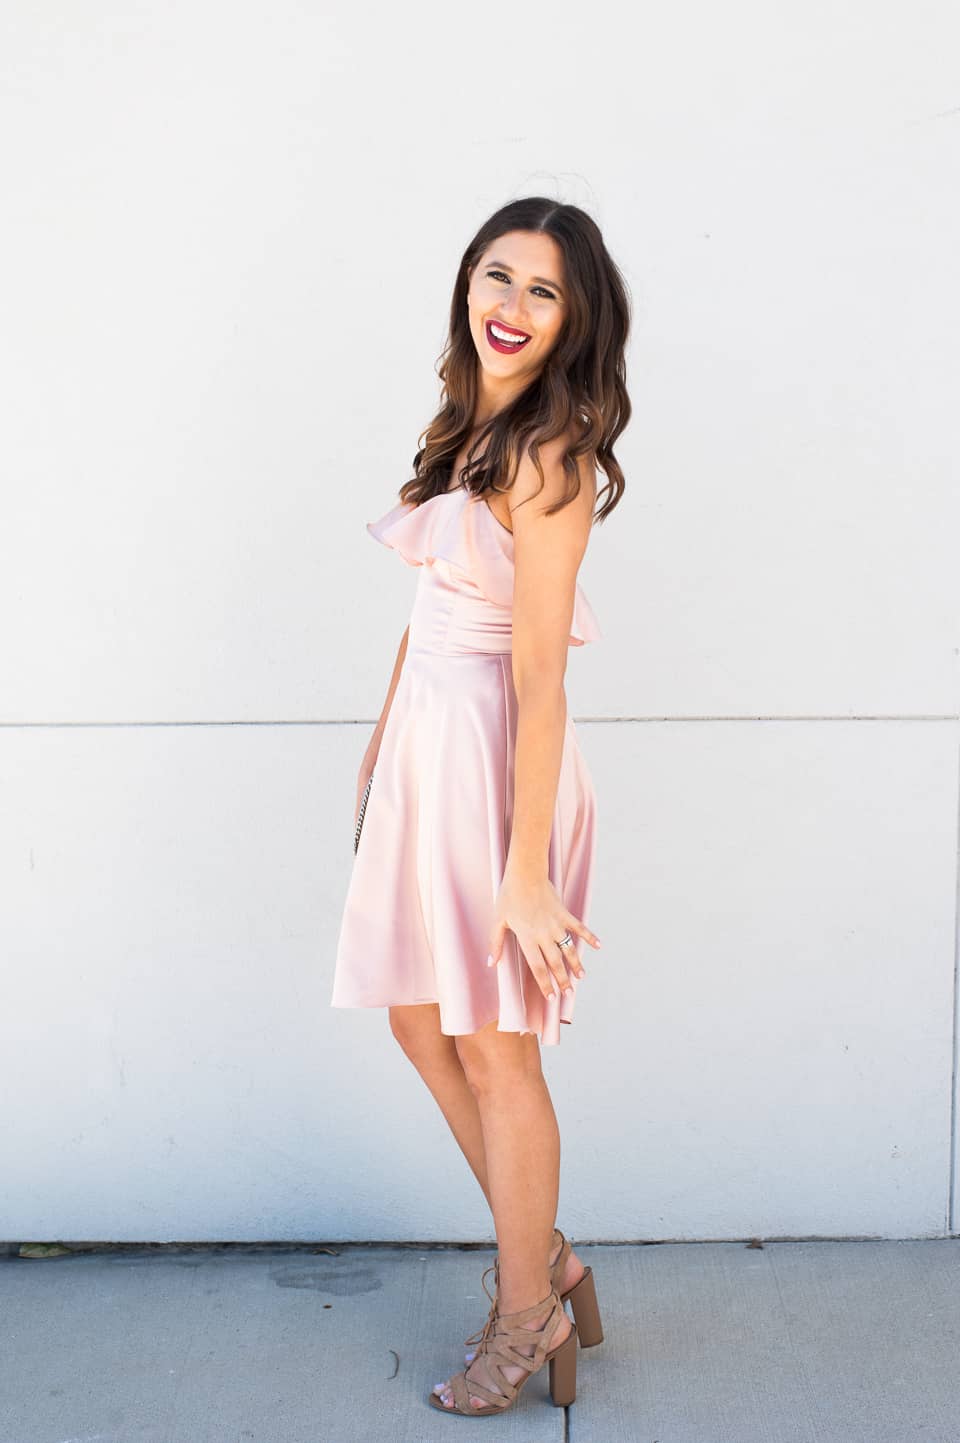 Dress Up Buttercup // A Houston-based fashion travel blog developed to daily inspire your own personal style by Dede Raad | Caved on a Pink Dress